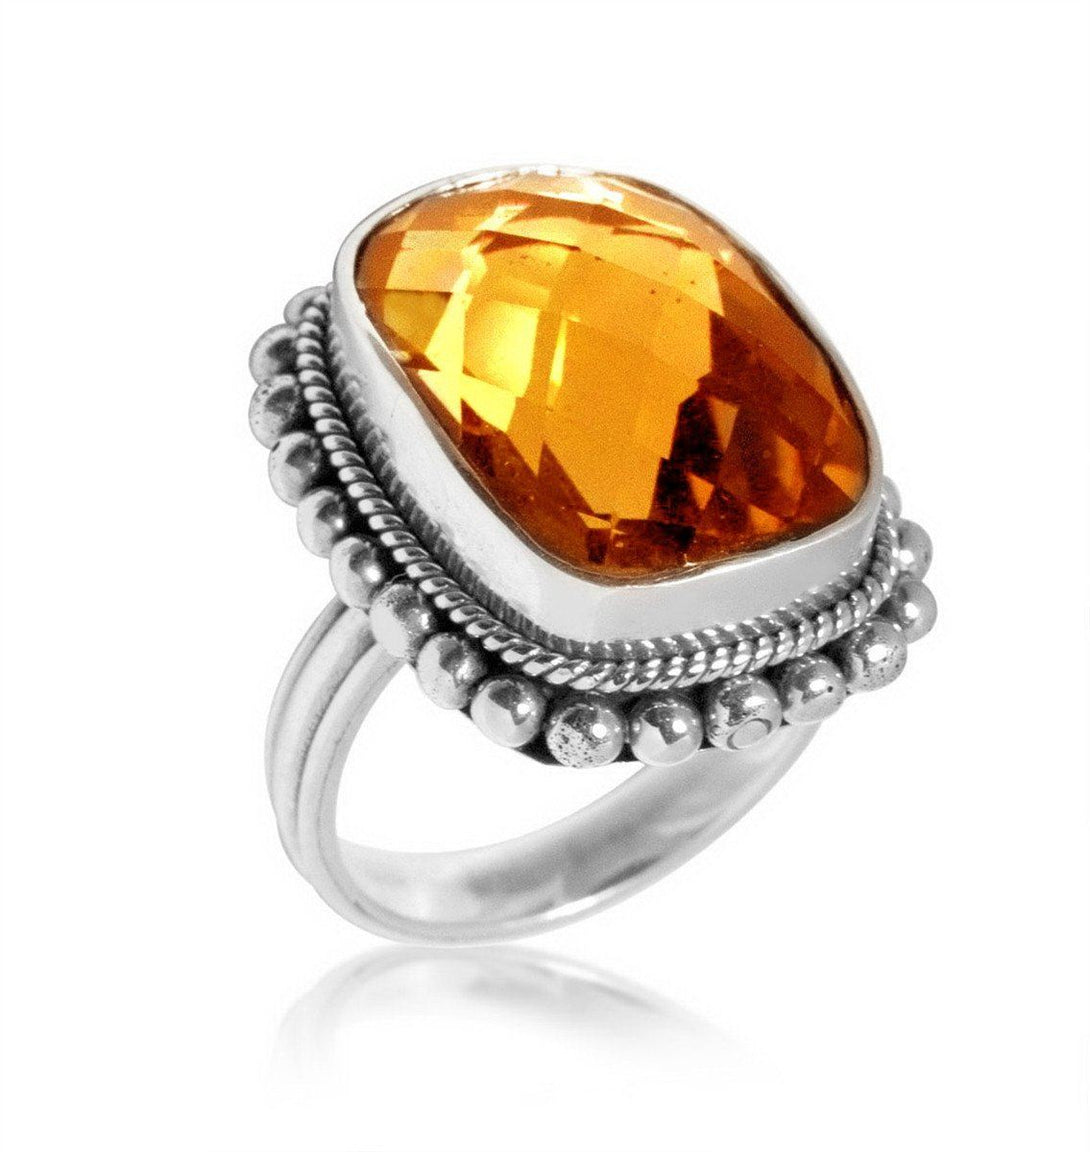 AR-6062-CT-8" Sterling Silver Ring With Citrine Q. Jewelry Bali Designs Inc 